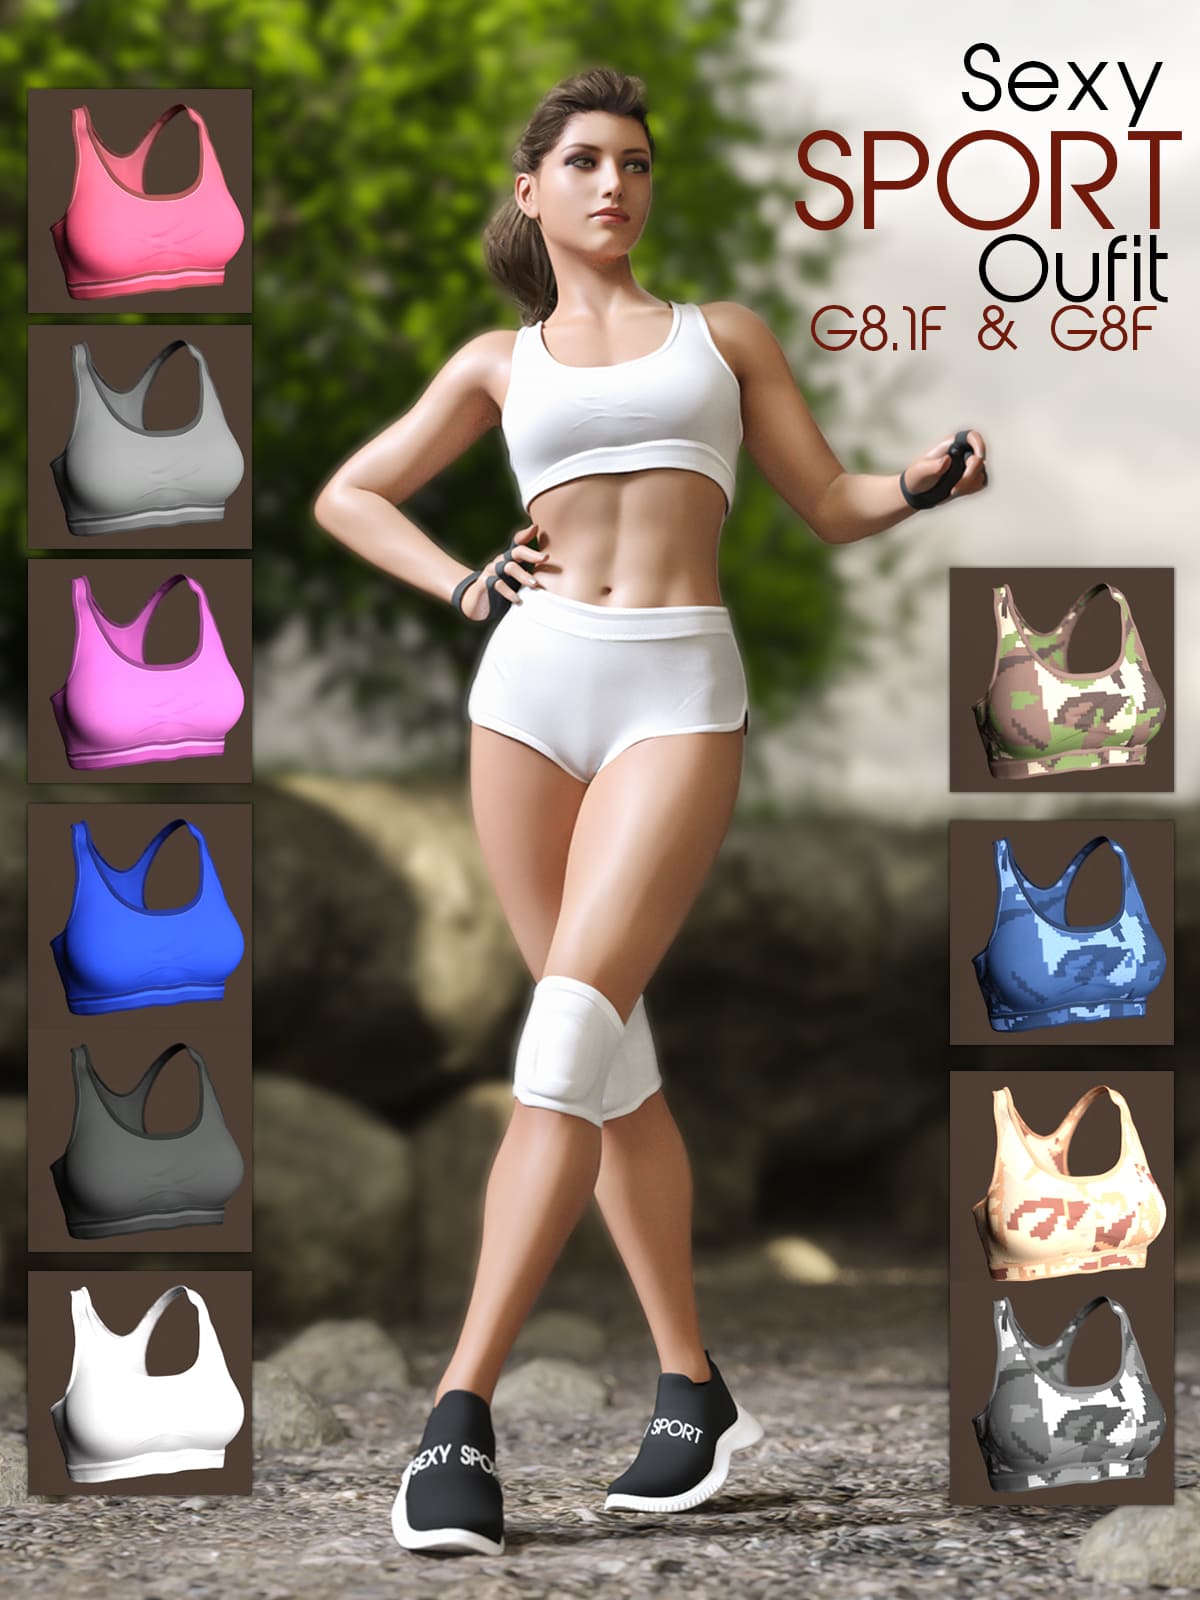 Sexy Sport Outfit For G8.1F & G8F_DAZ3DDL